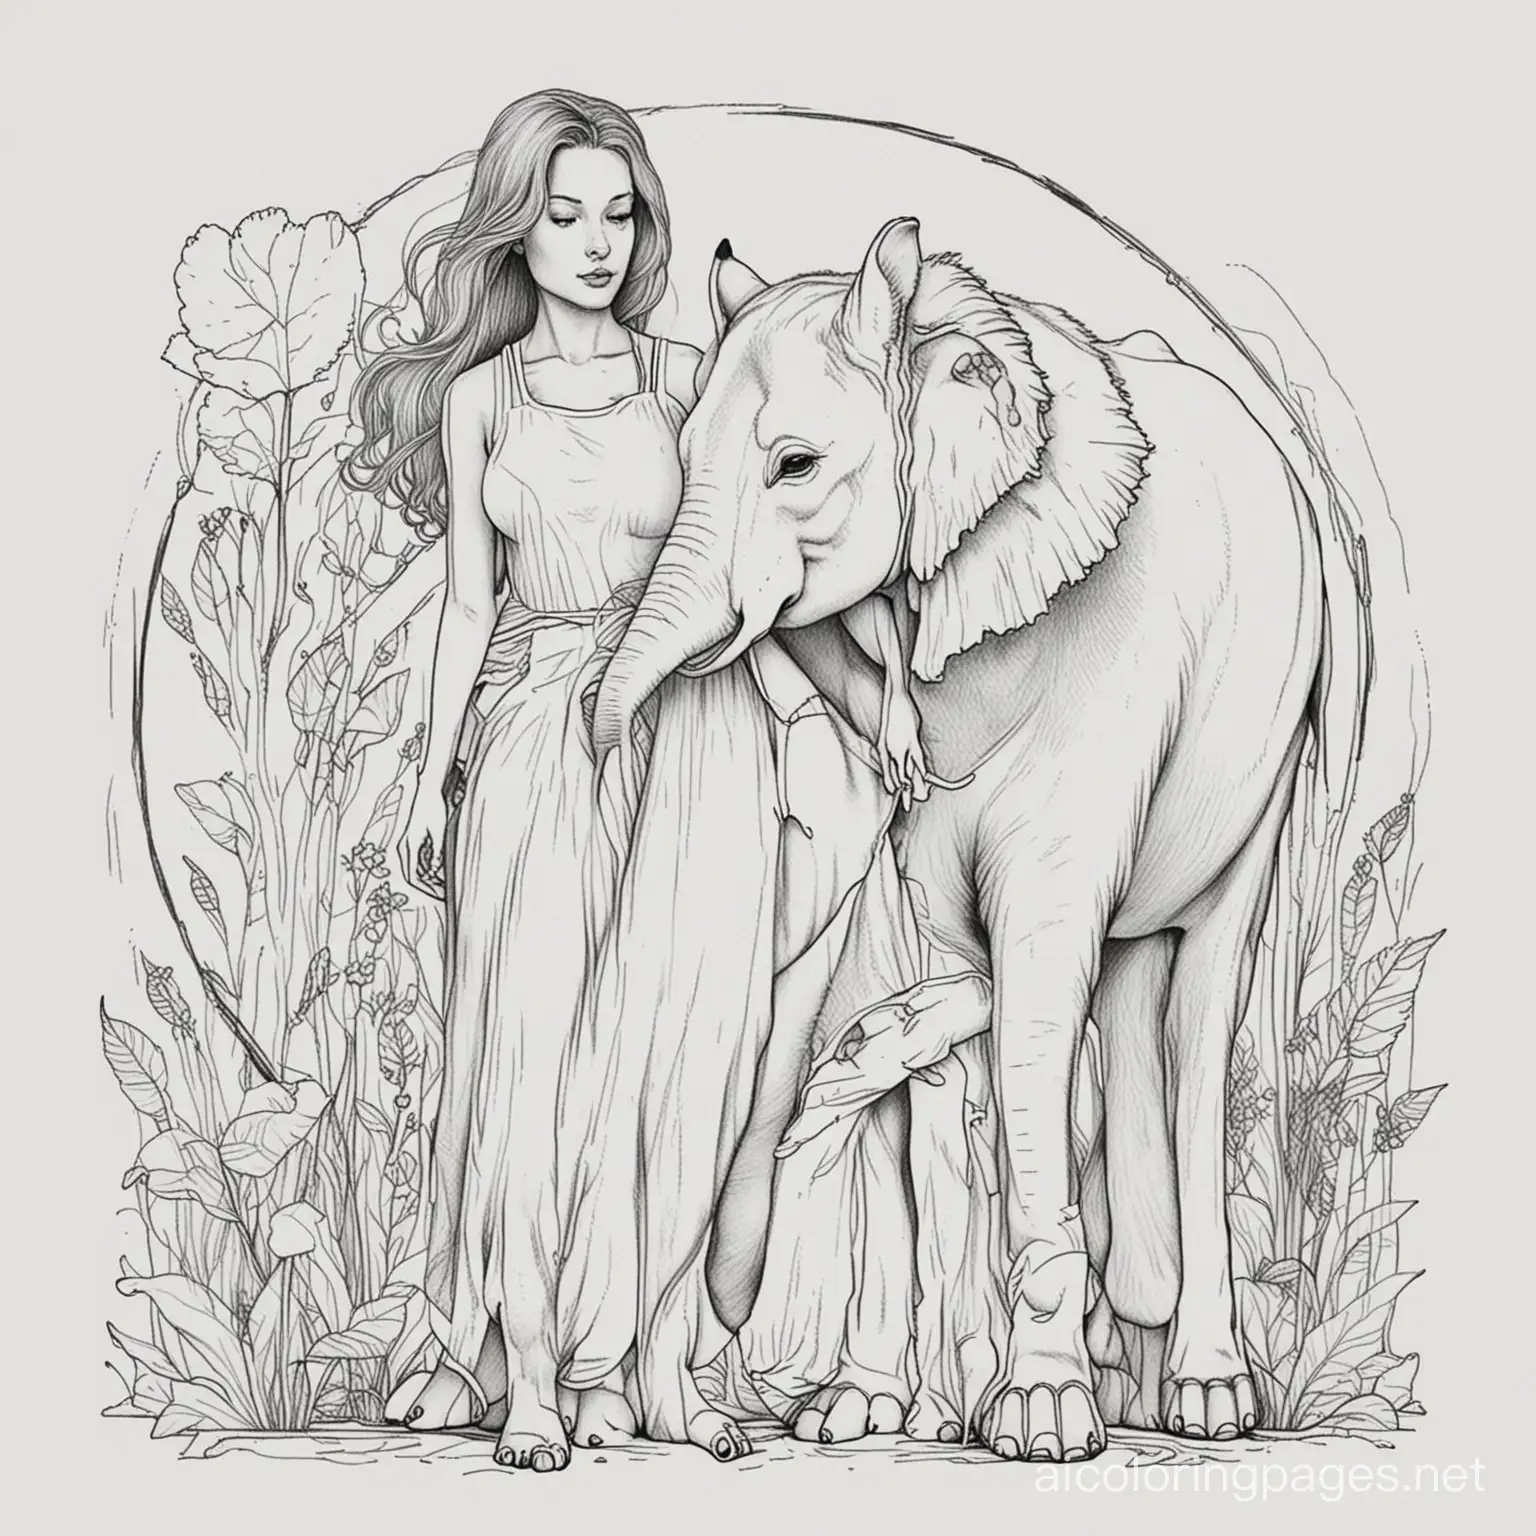 Woman-with-Fox-and-Elephant-Coloring-Page-for-Kids